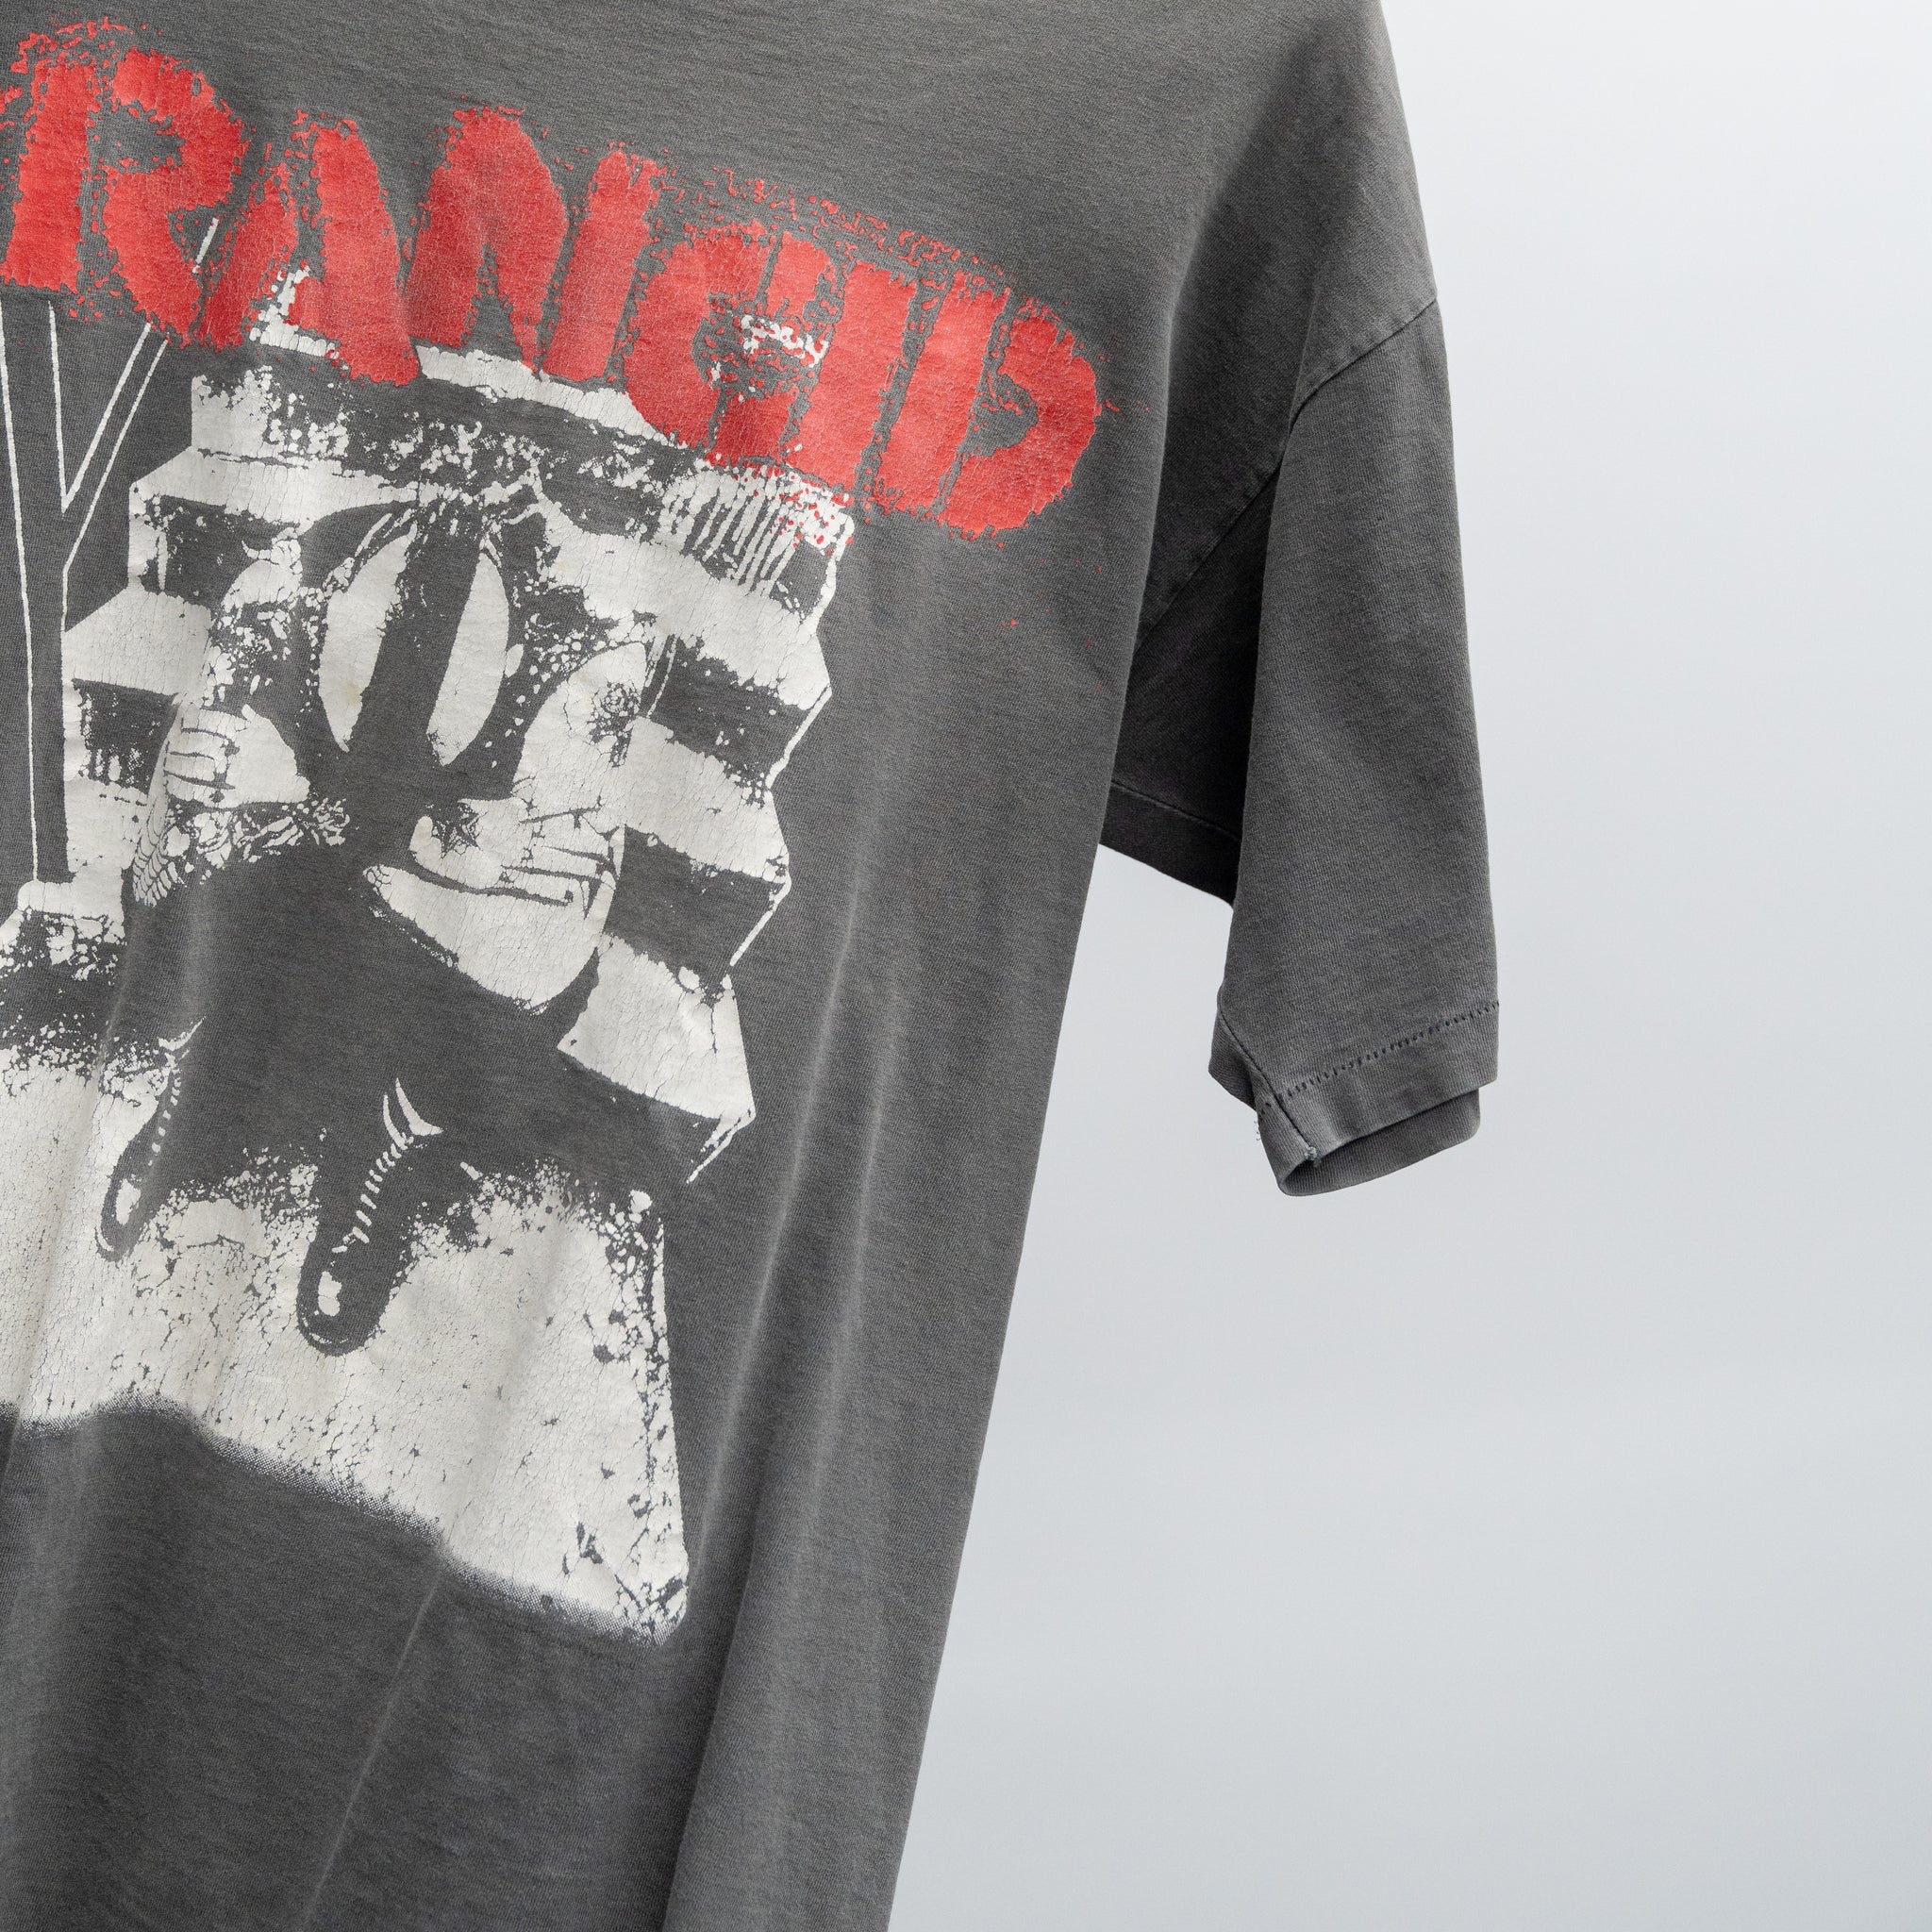 FADED RANCID '...AND OUT COMES THE WOLVES' TOUR TEE - 1990'S